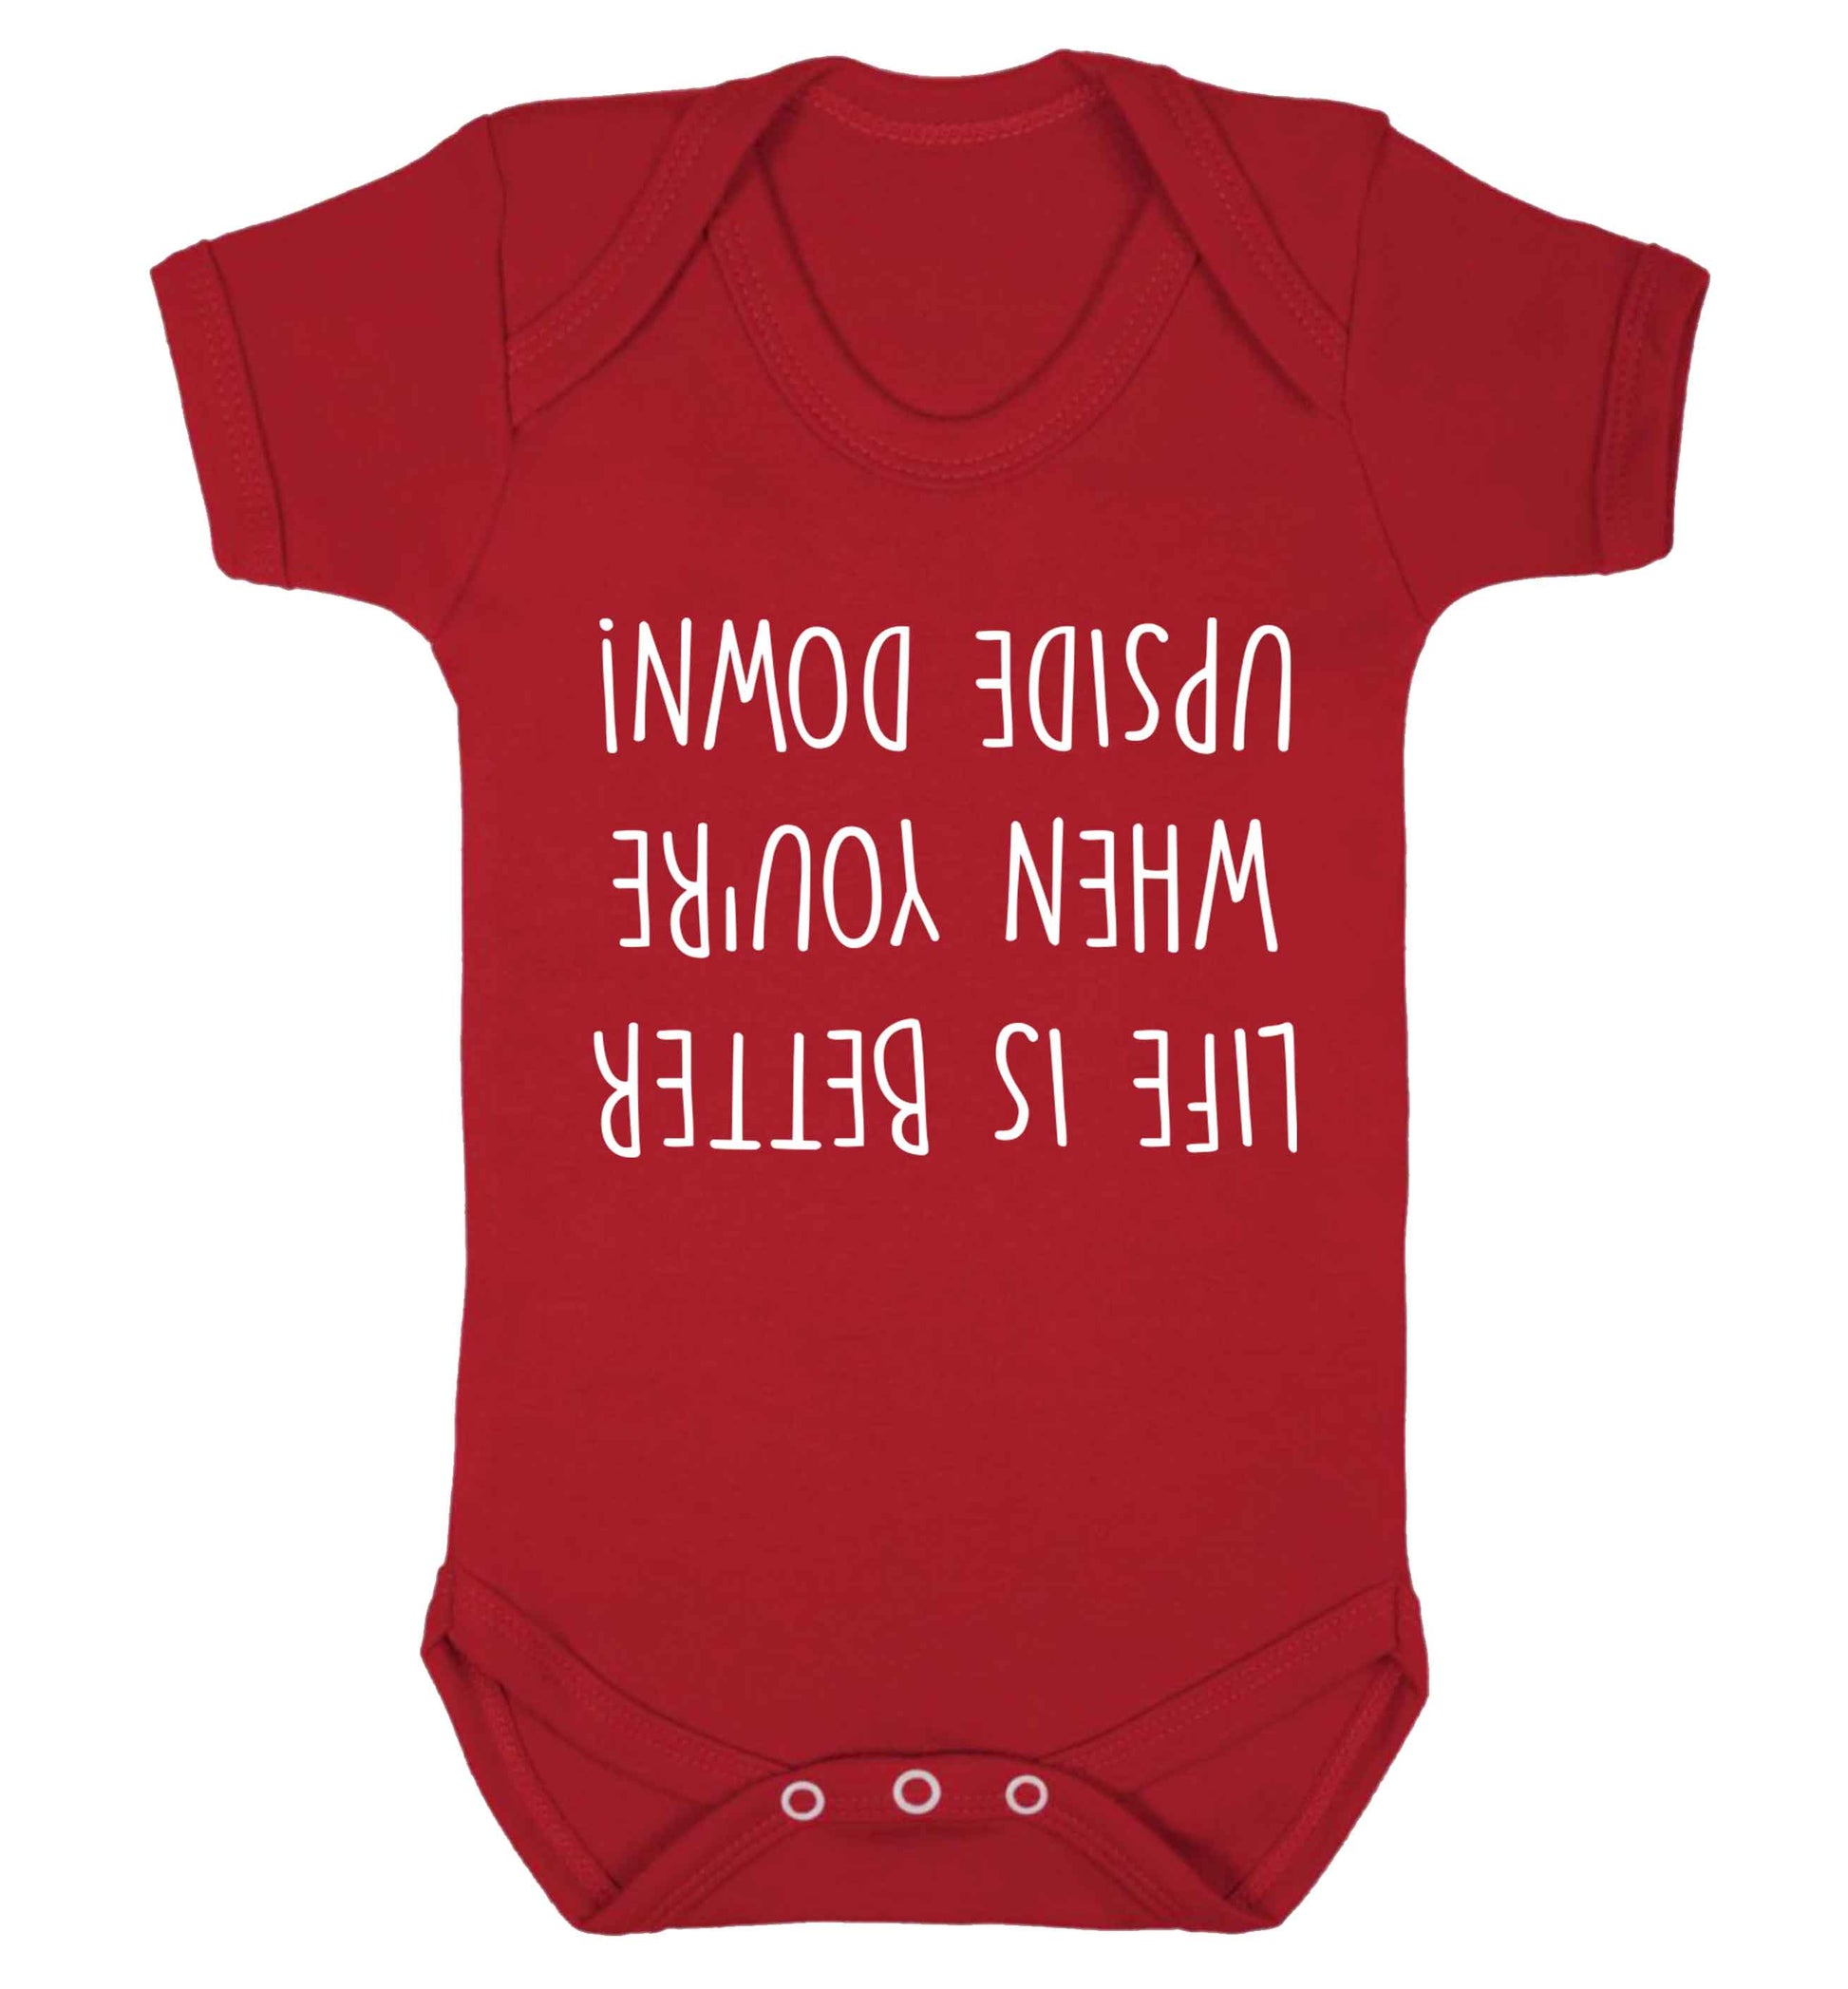 Life is better upside down Baby Vest red 18-24 months